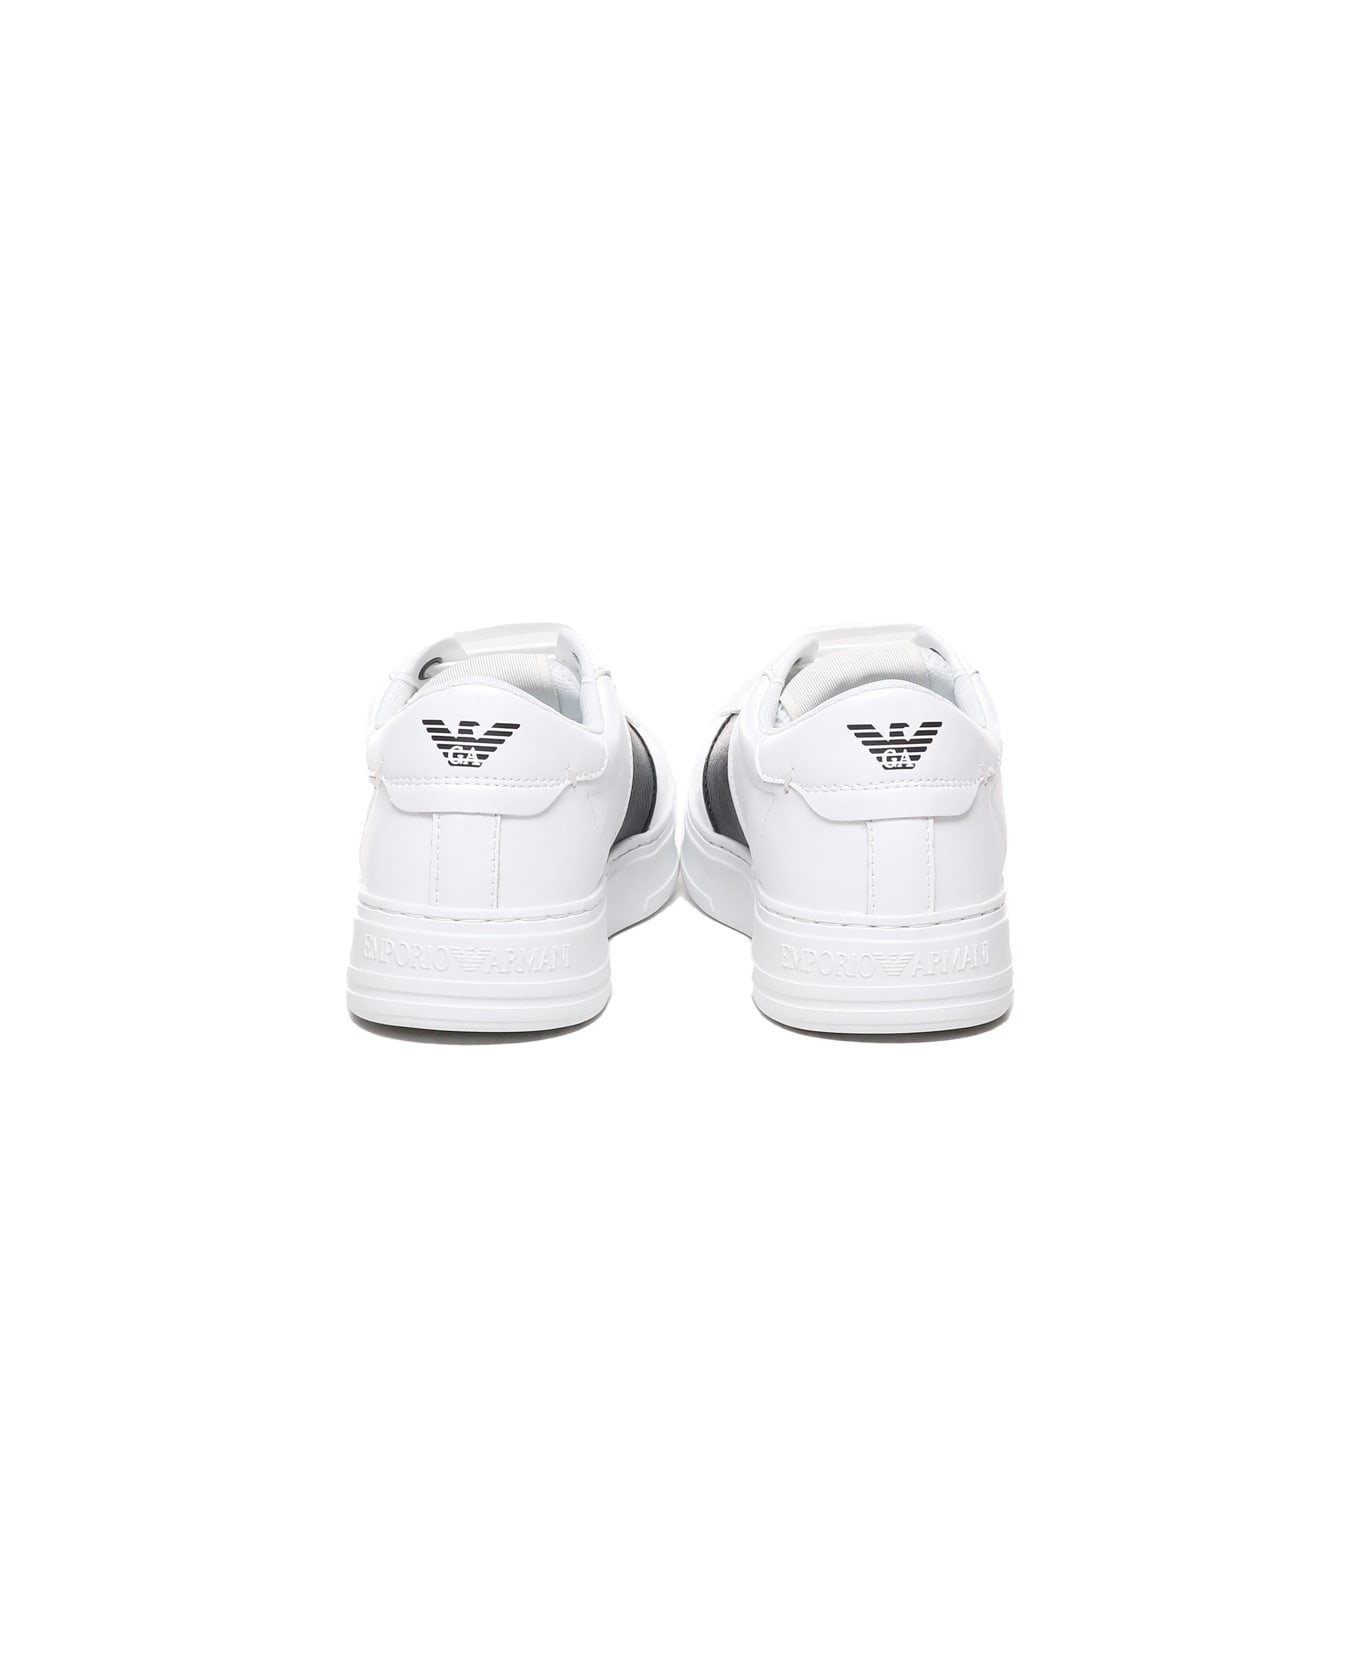 Emporio Armani Leather Sneakers With Logo